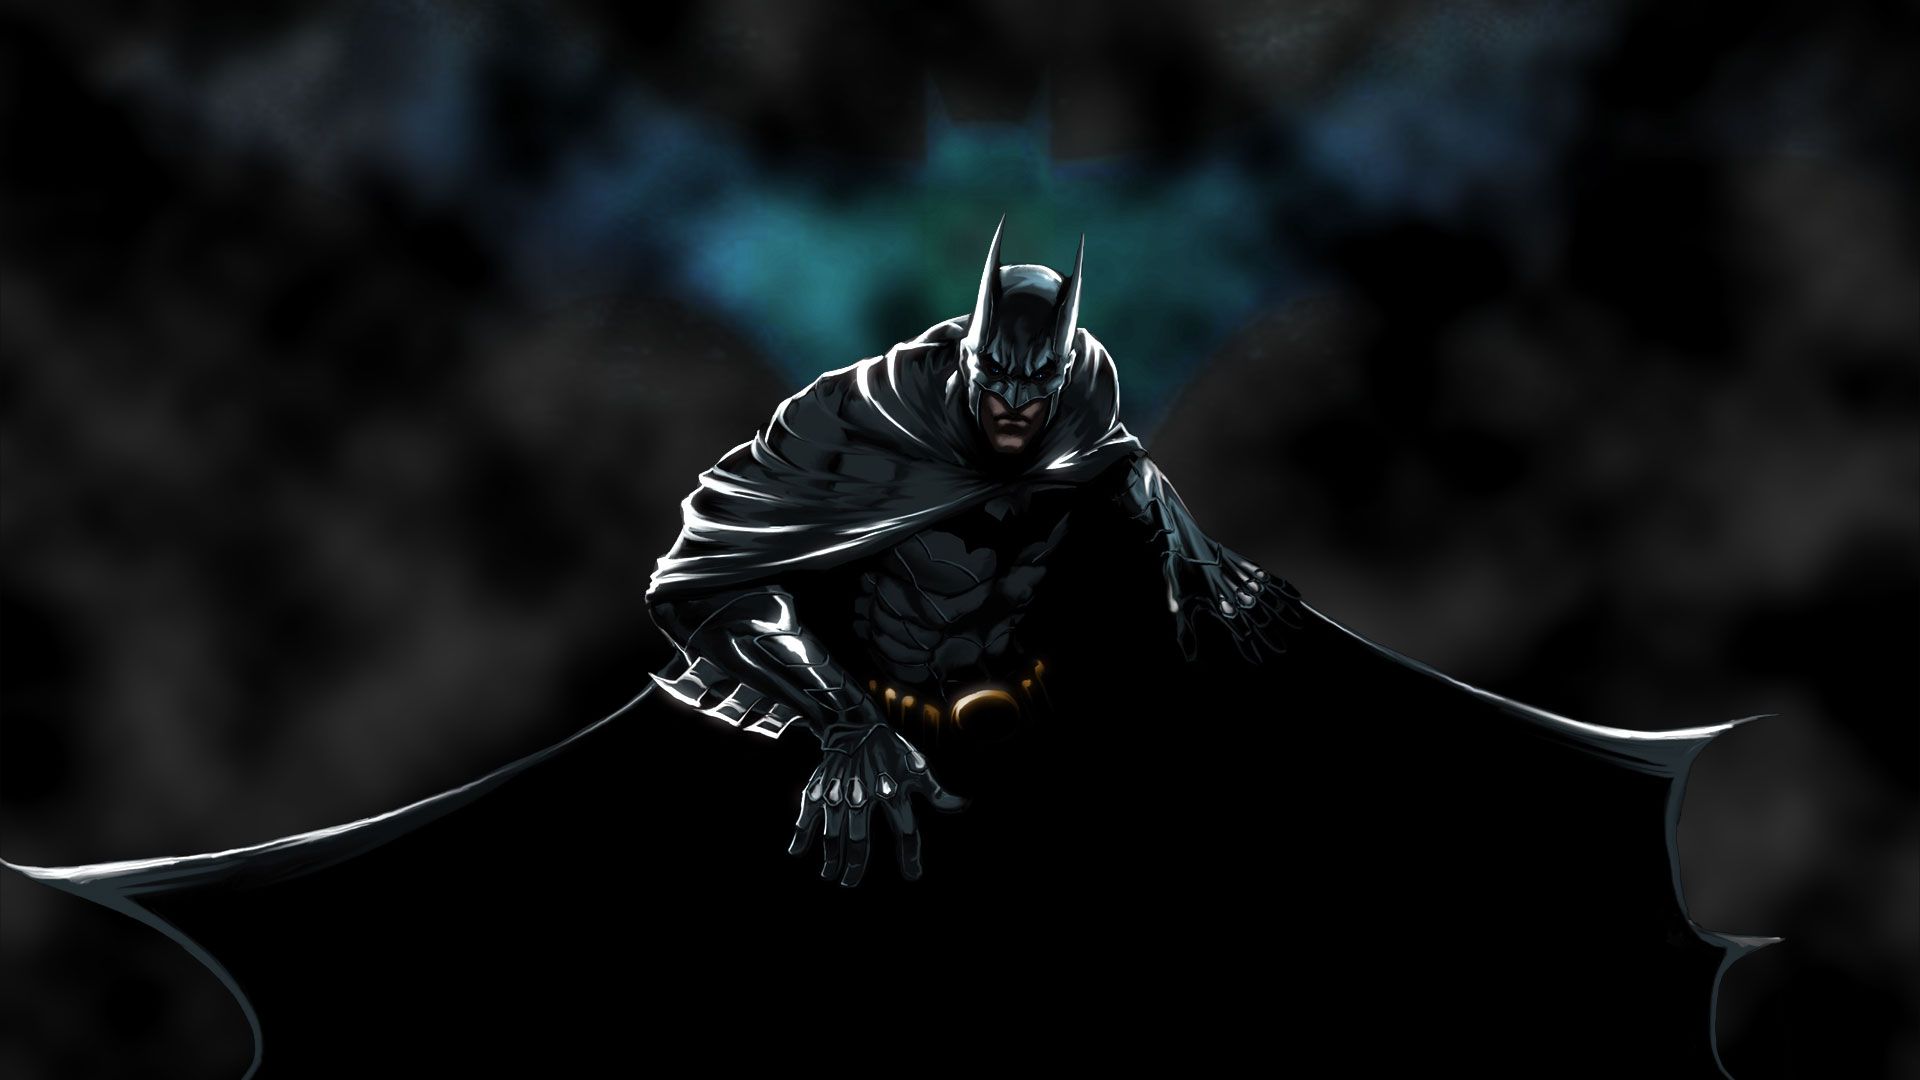 Cool Batman Wallpapers - HD Wallpapers and Pictures